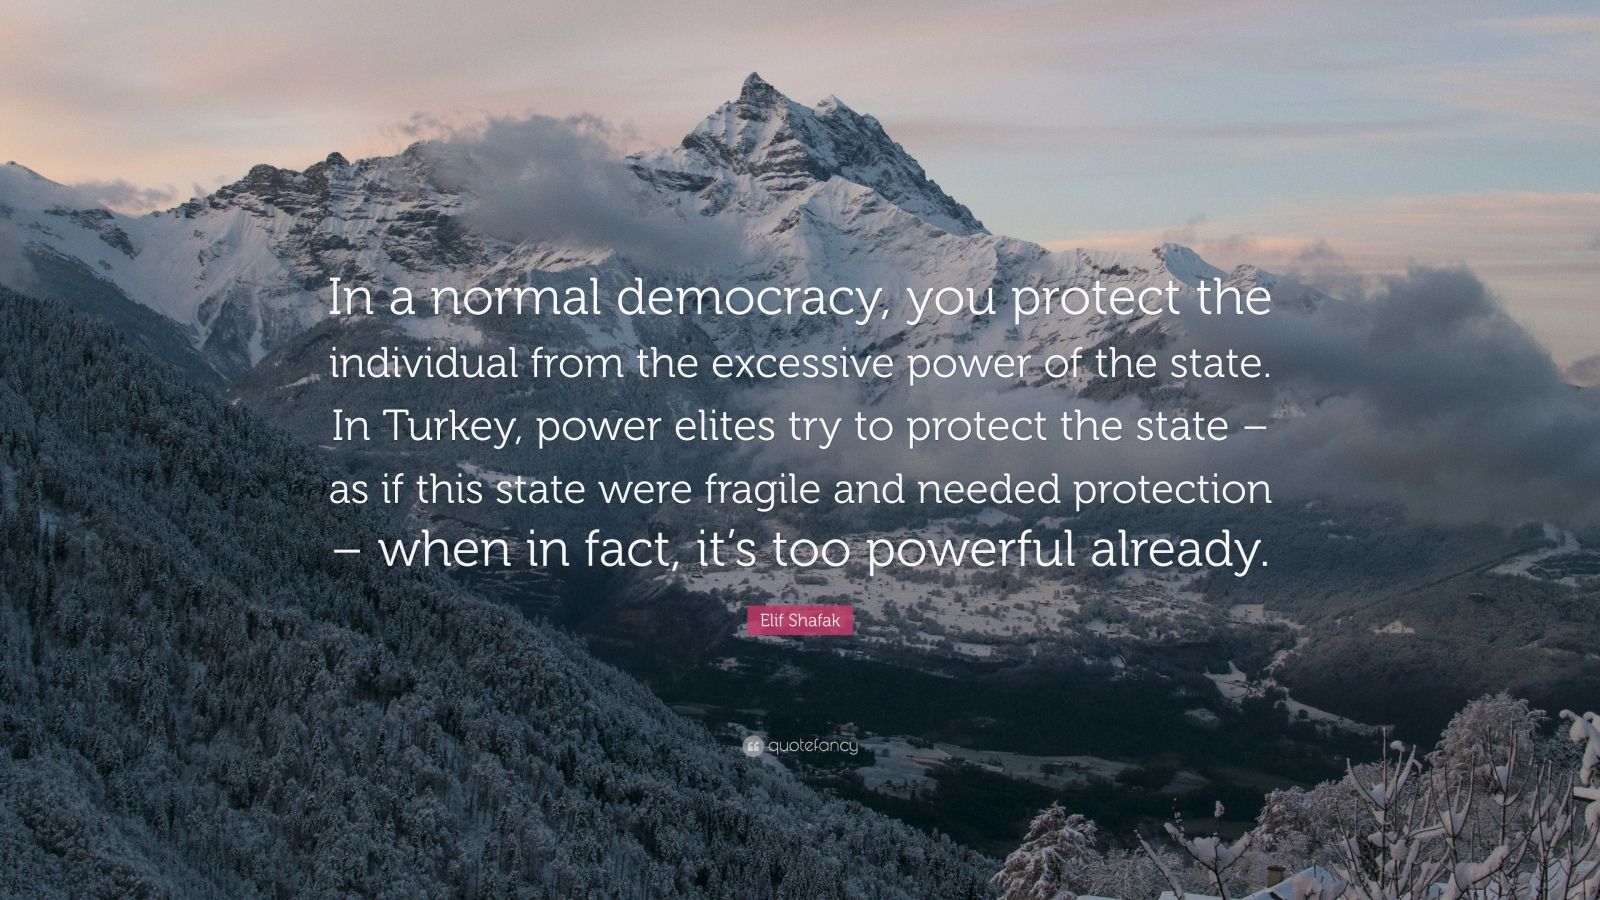 Elif Shafak Quote: “In a normal democracy, you protect the individual